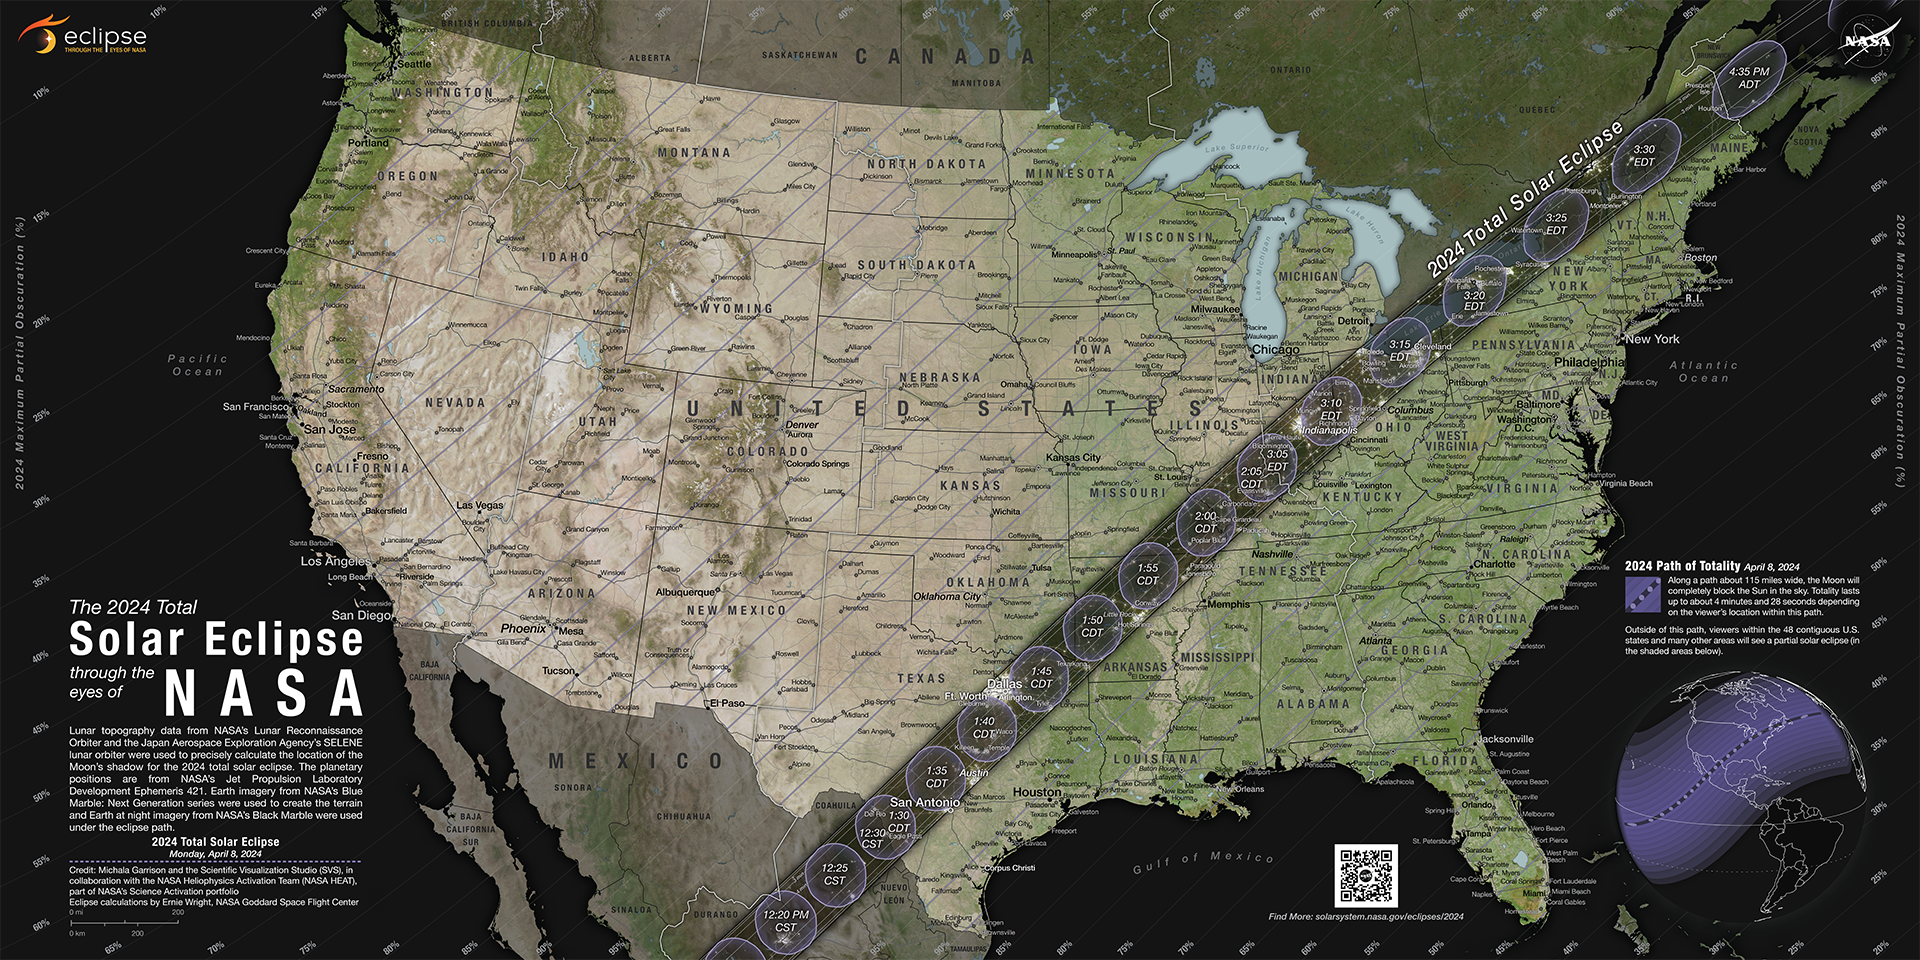 New School students’ guide to the ‘Great North American Eclipse’ on